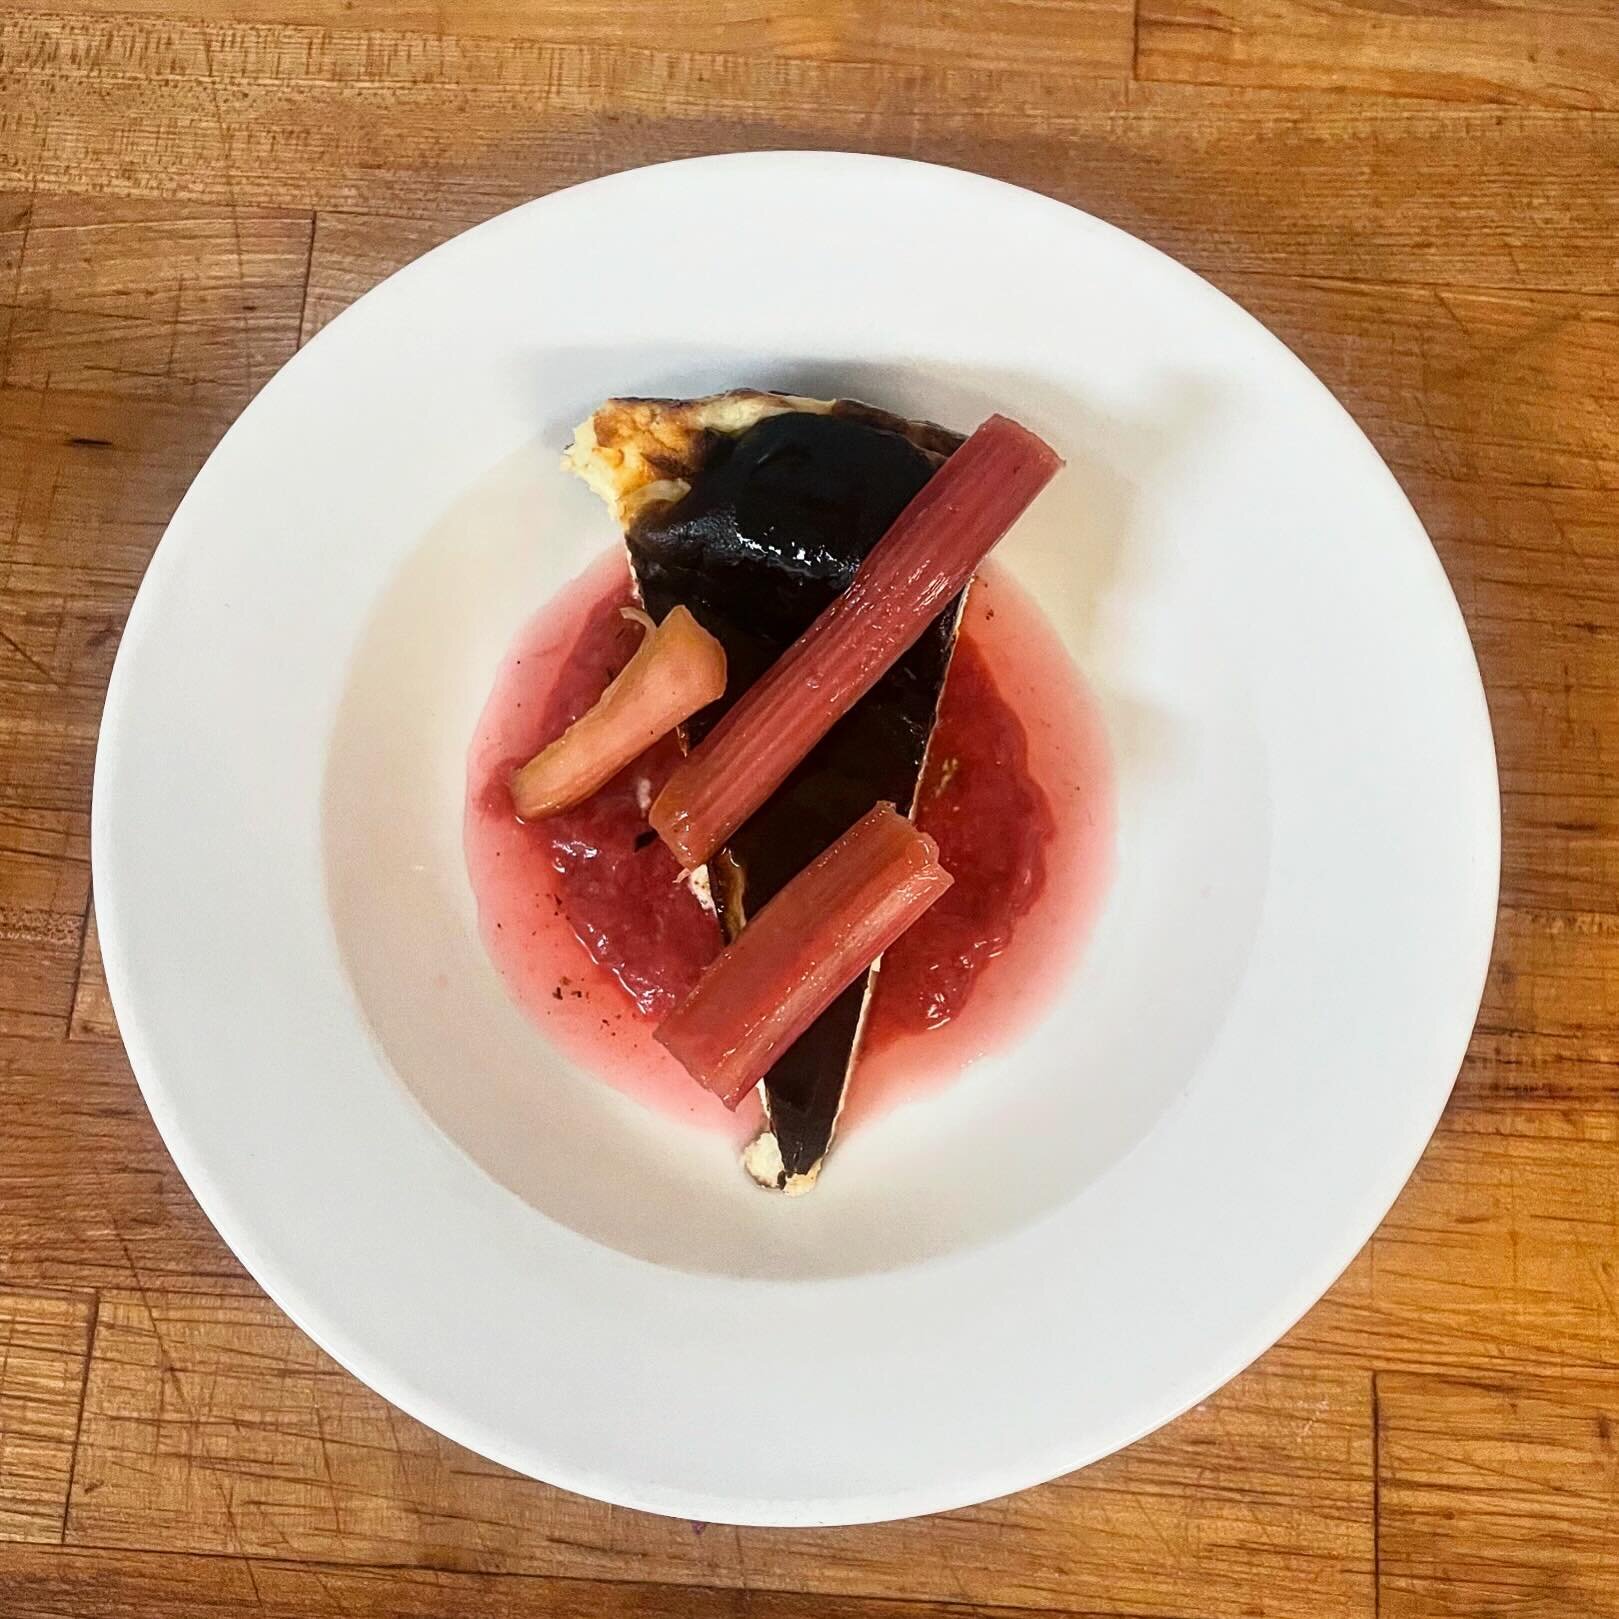 Seating 4-10 tonight!

📸 our Basque Cheesecake gets a spring update today with Veracruz vanilla bean poached rhubarb &amp; citrus rhubarb compote 👩🏻&zwj;🍳 💋!

Plus rhubarb is showing up in a new cocktail &amp; we have a couple of old Party Bar c